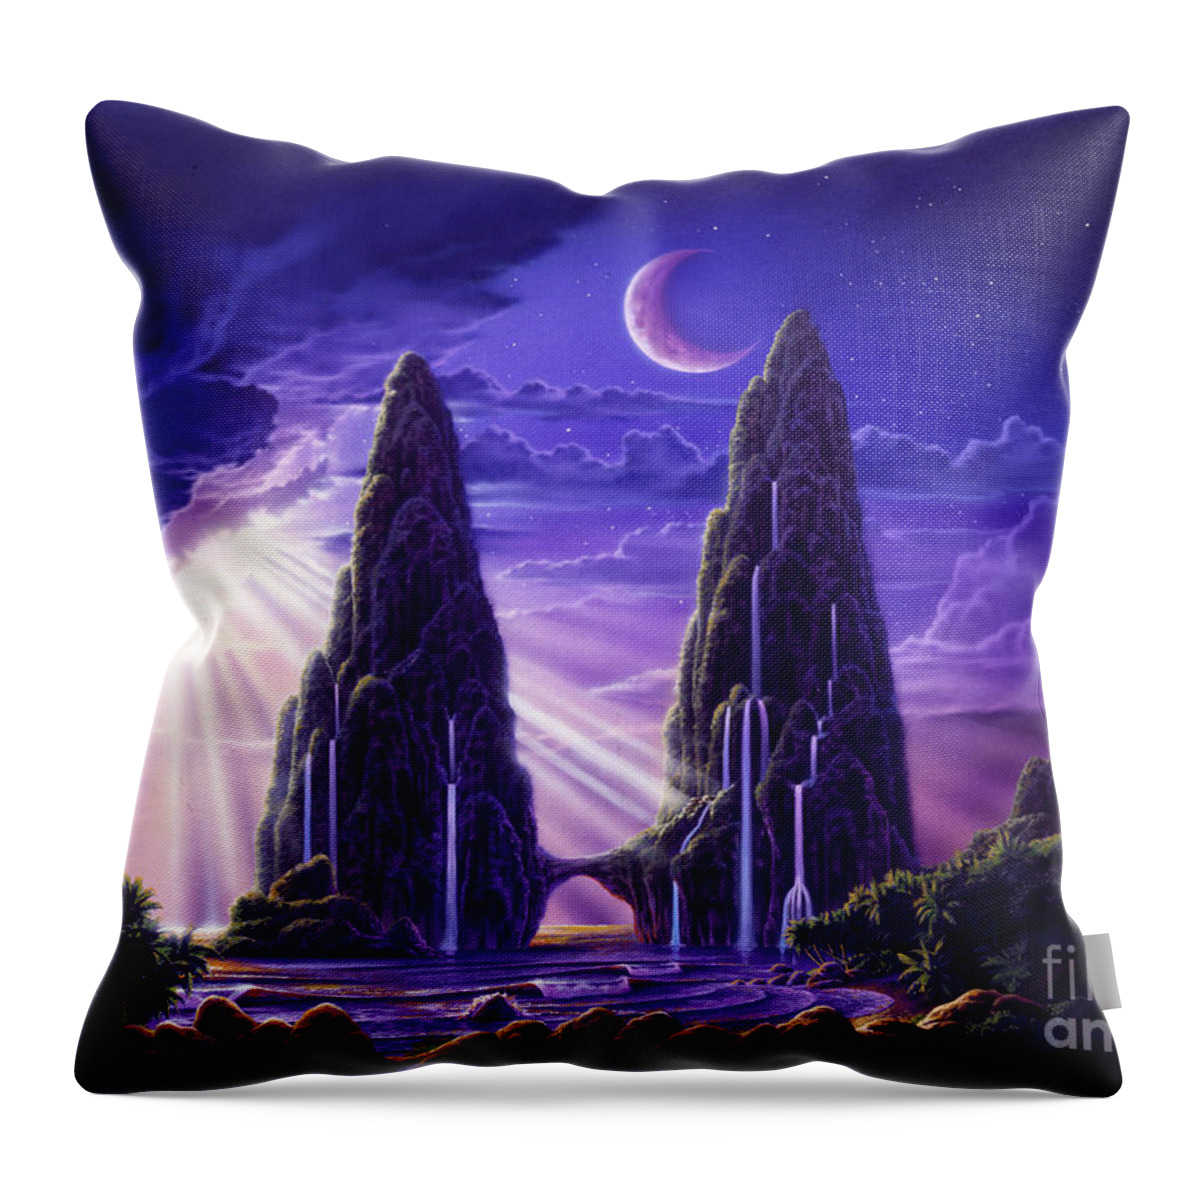 Tropical Throw Pillow featuring the digital art Tropical Hideaway by MGL Meiklejohn Graphics Licensing